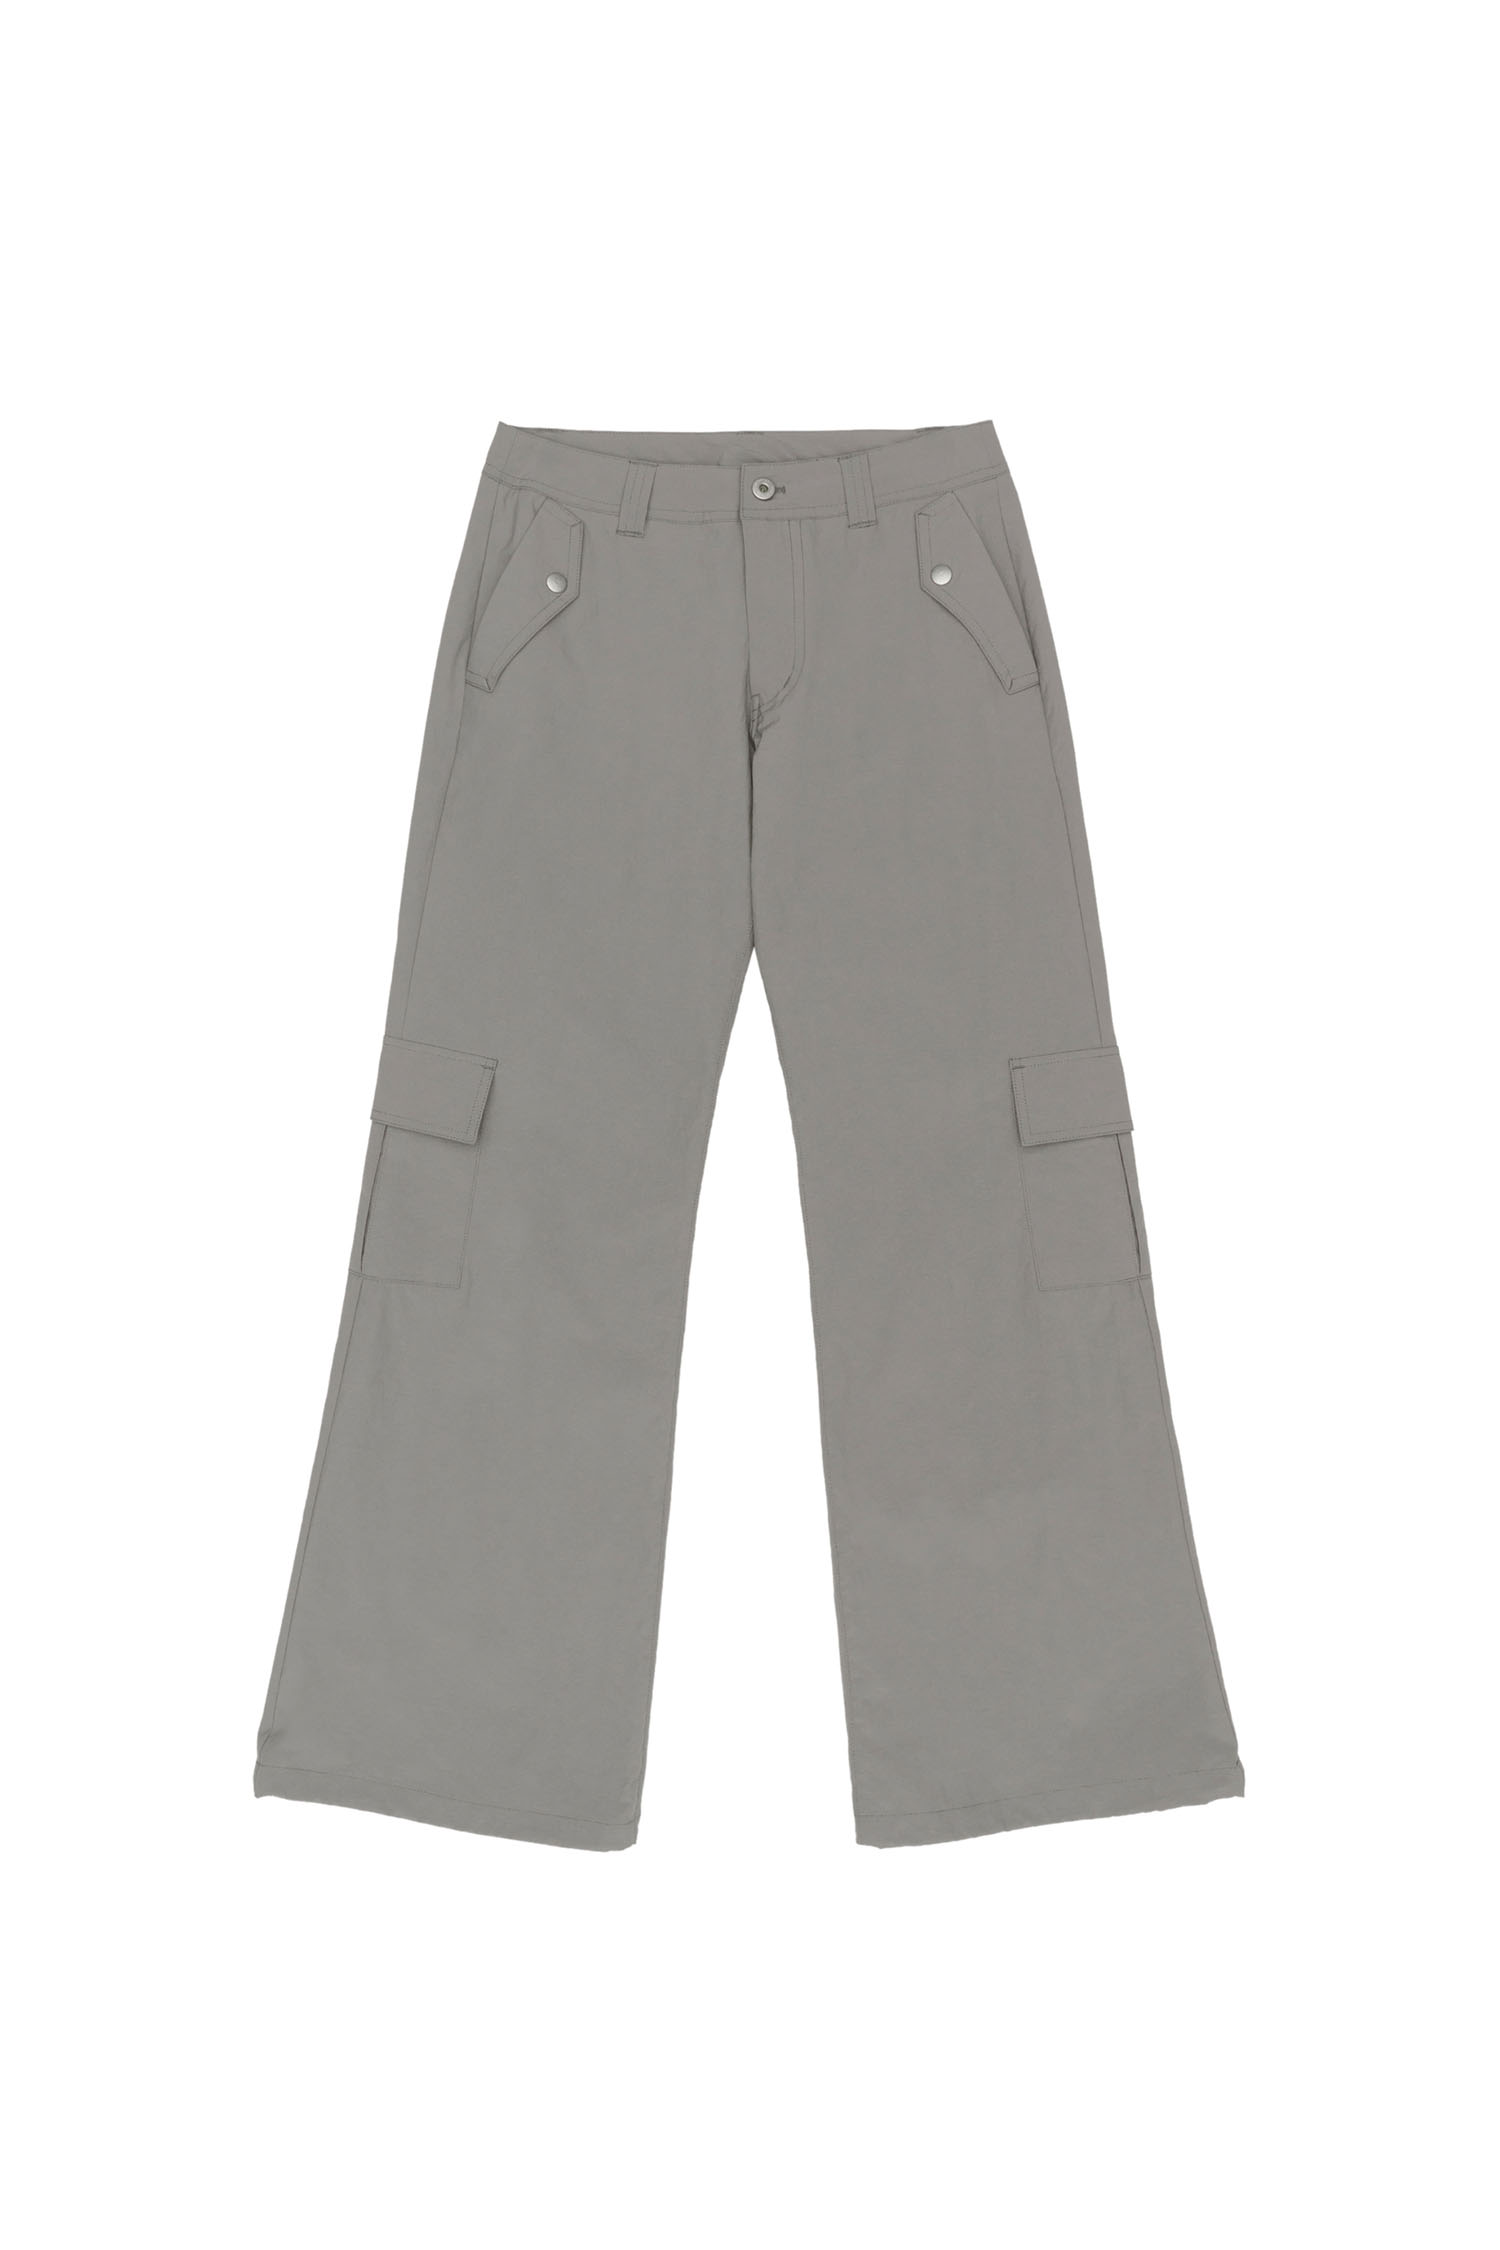 BOOTCUT GREY CARGO PANTS WITH MULTI POCKETS